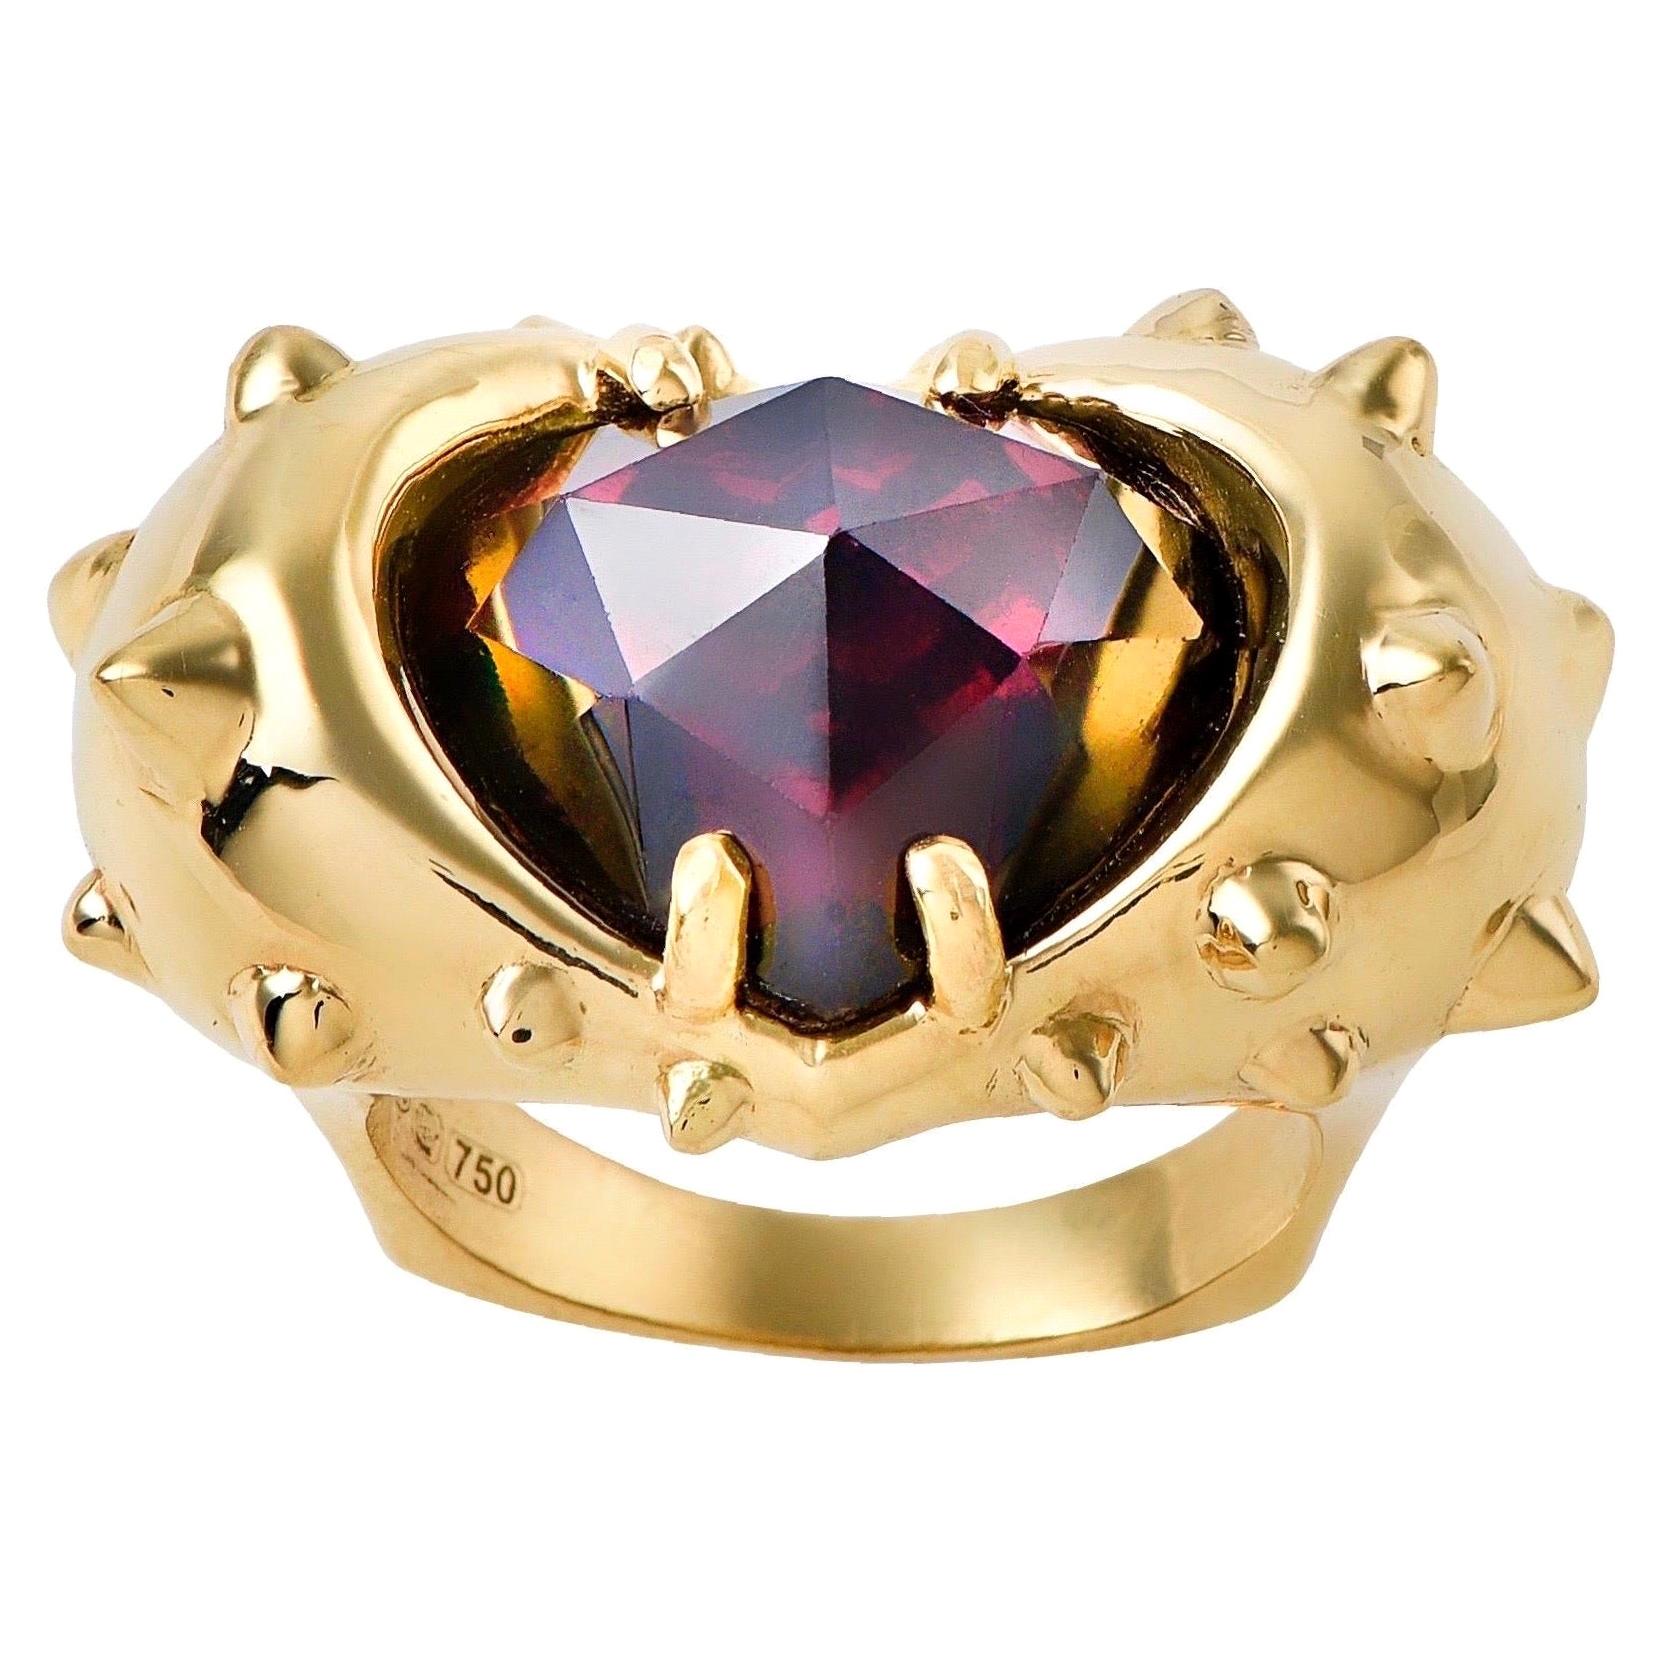 Contemporary Hand Sculpted 18K Yellow Gold and Rose Cut Red Garnet Heart Ring